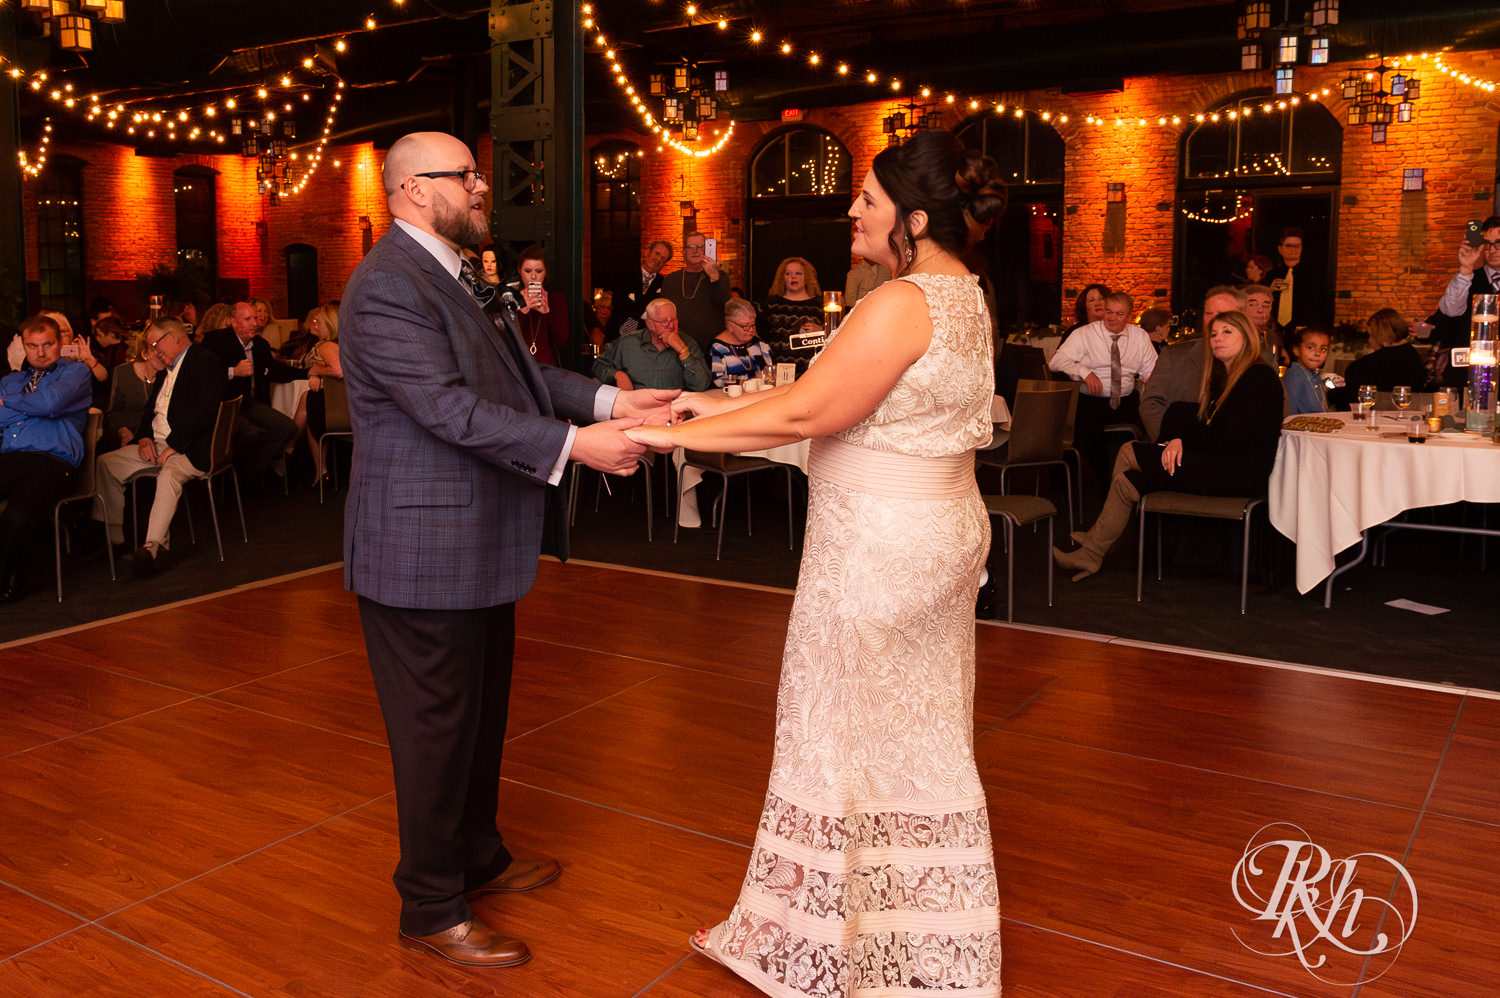 Bride and groom share first wedding dance at Nicollet Island Pavilion in Minneapolis, Minnesota.